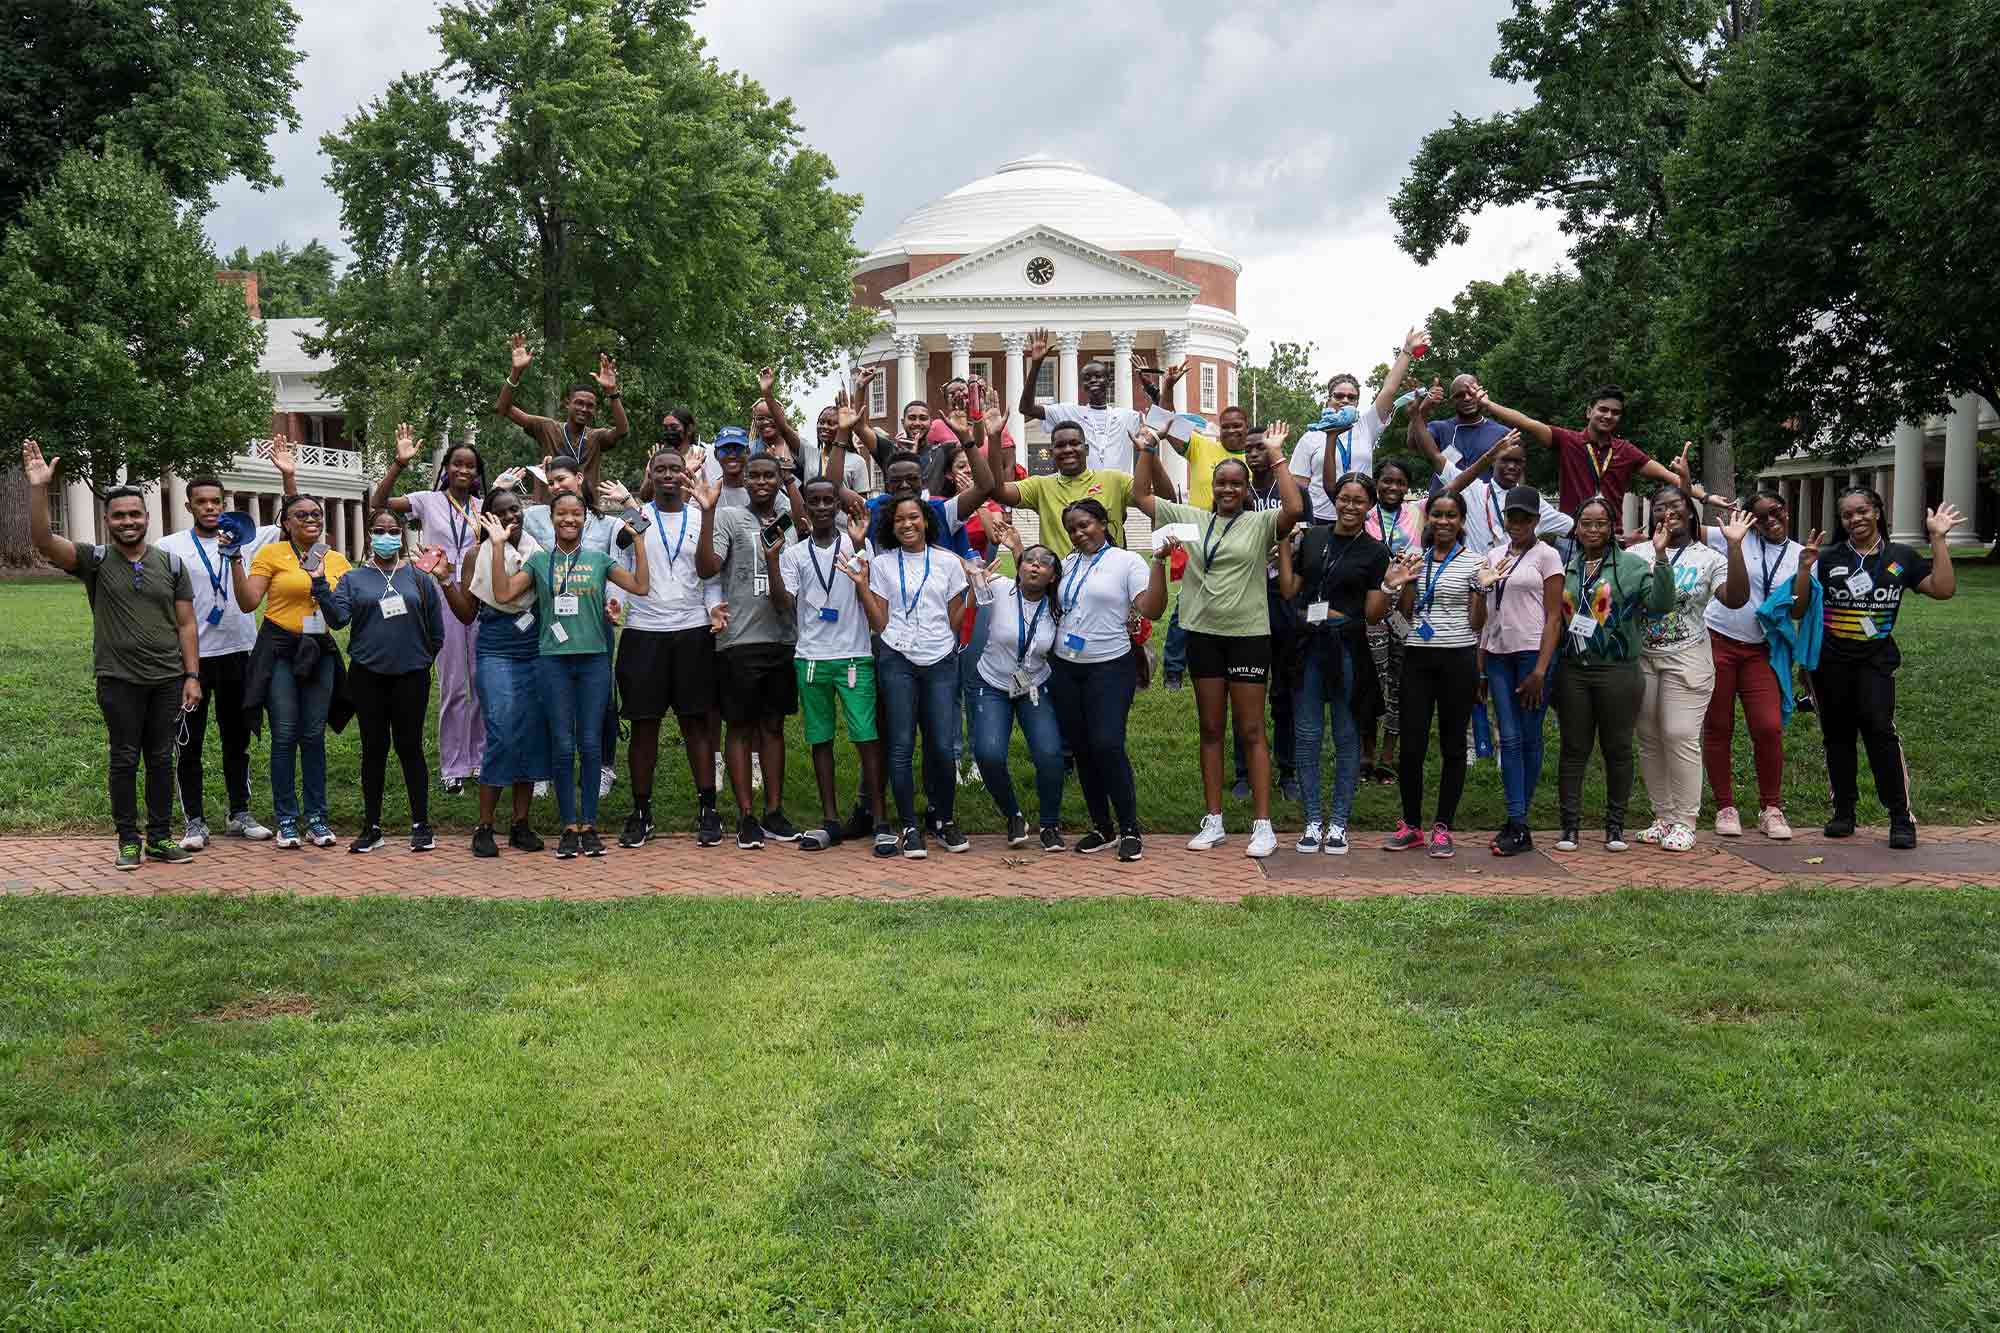 Group photo of the Caribbean Ambassadors on the Lawn in front of the Rotunda.